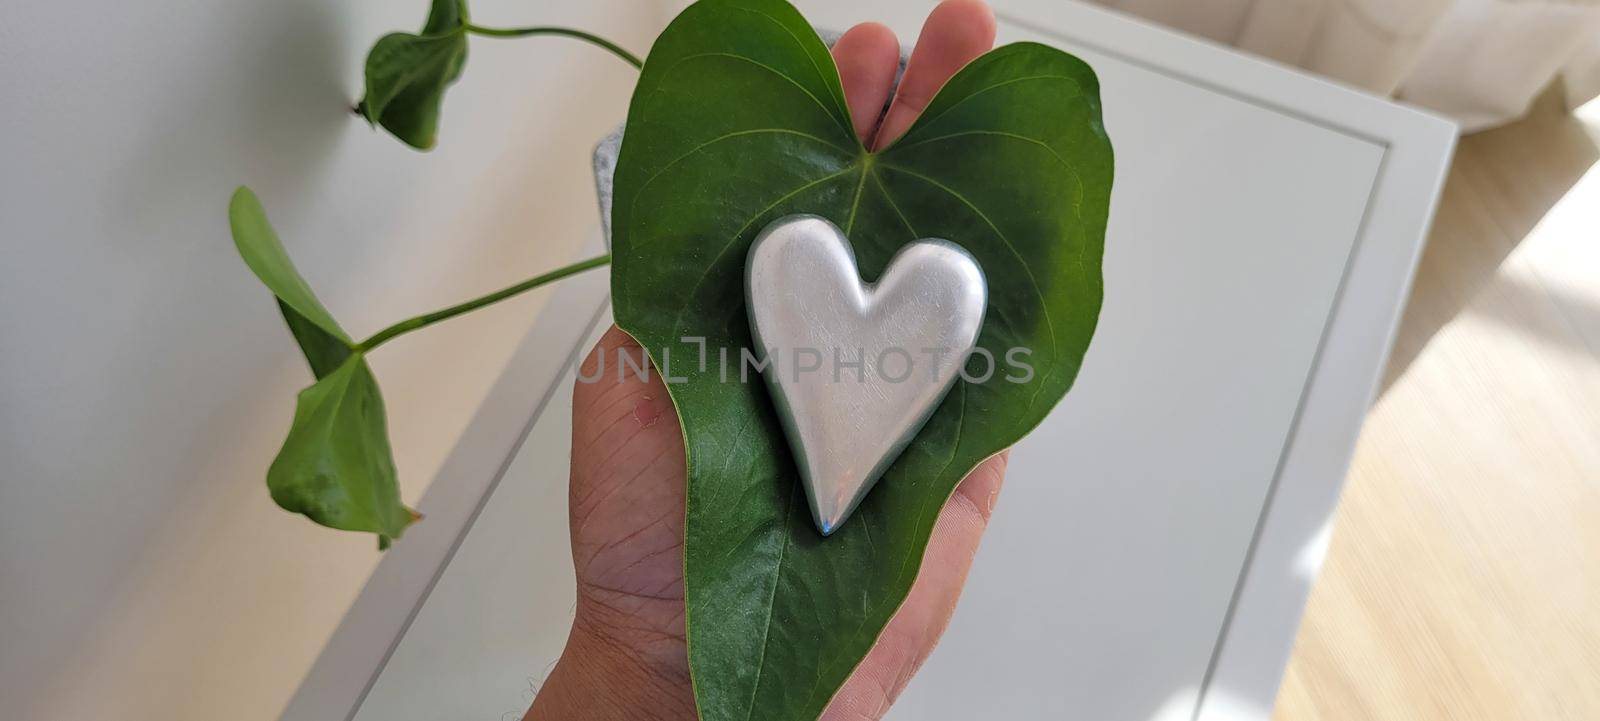 romantic background of iron shiny heart with marble and leaf by sarsa